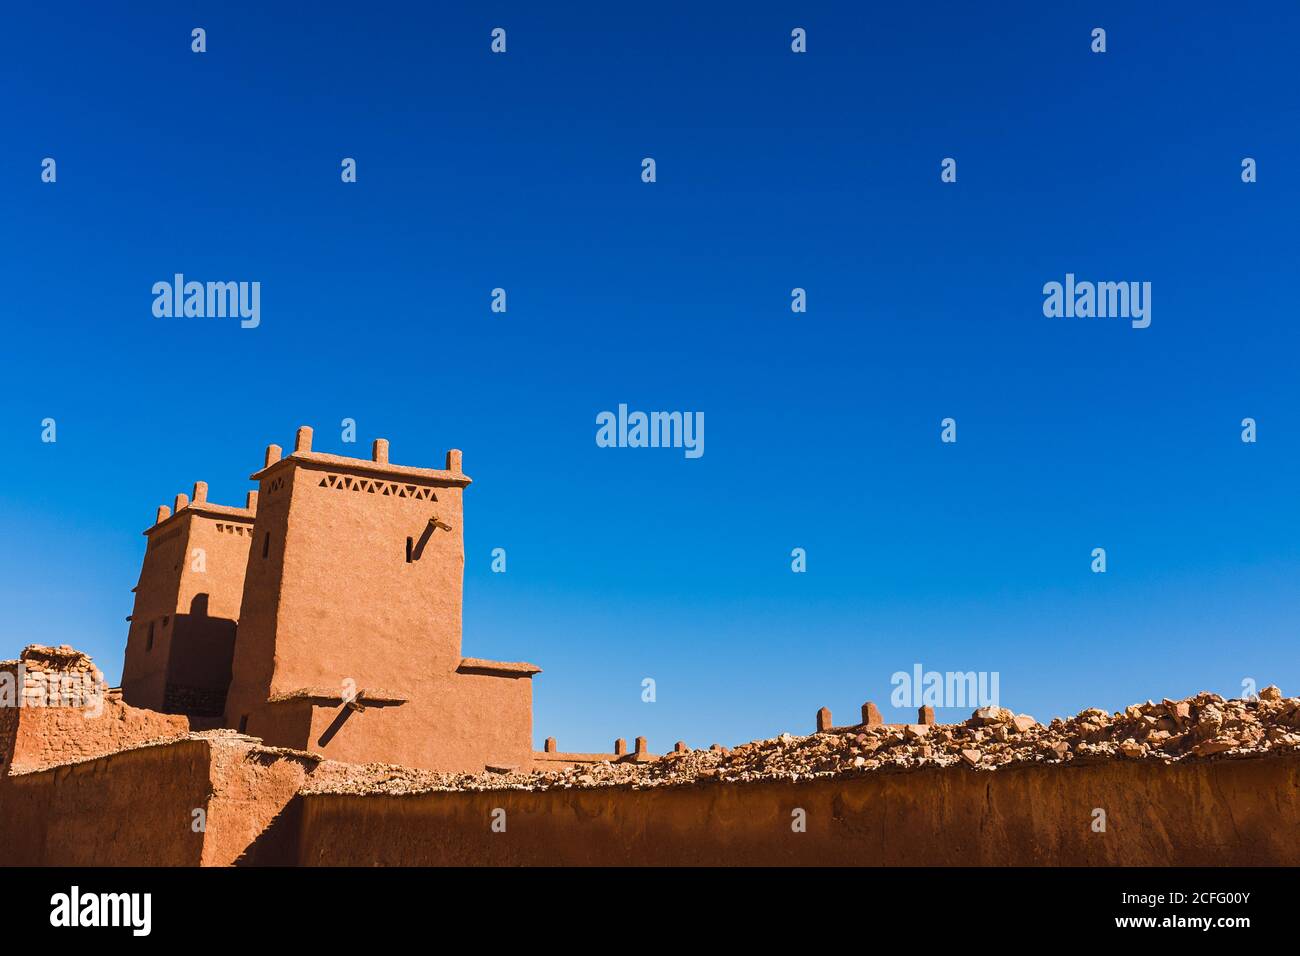 Magnificent scenery of facade of ancient clay buildings and walls in Ait Ben Haddou on sunny day Stock Photo